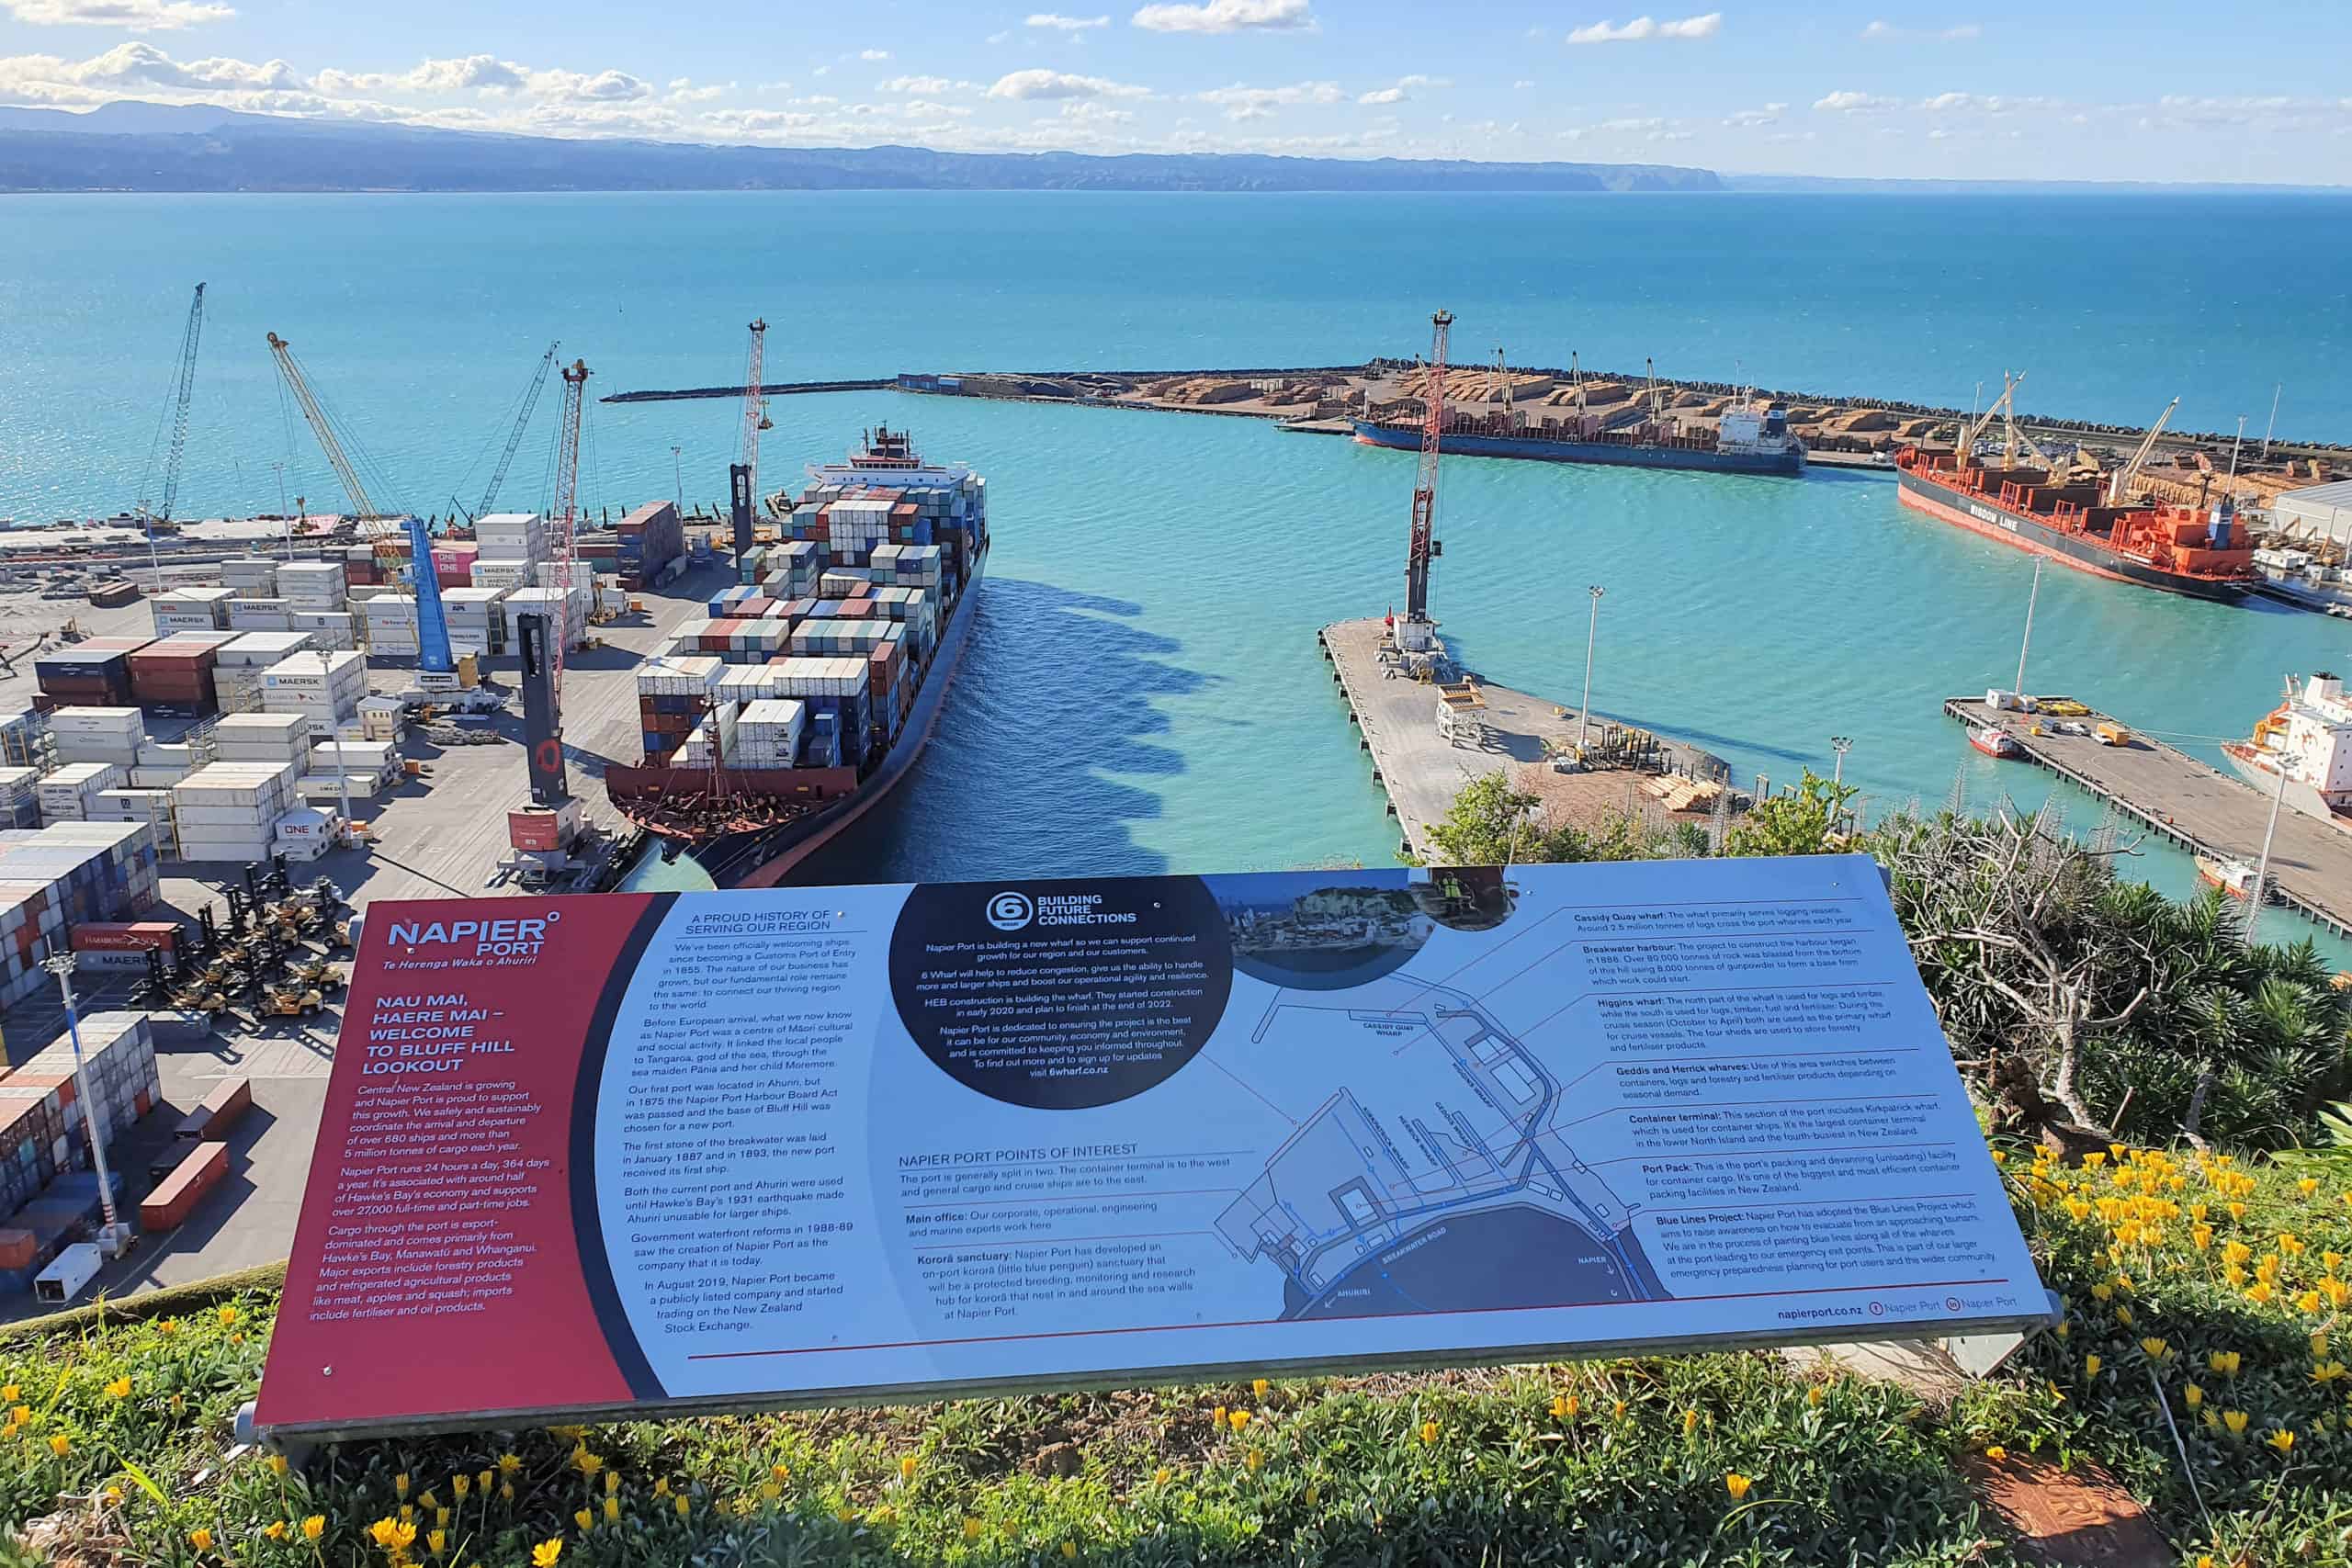 Best things to do in Napier New Zealand - Paul and Sandra - Napier overlooking port from Bluff Hill